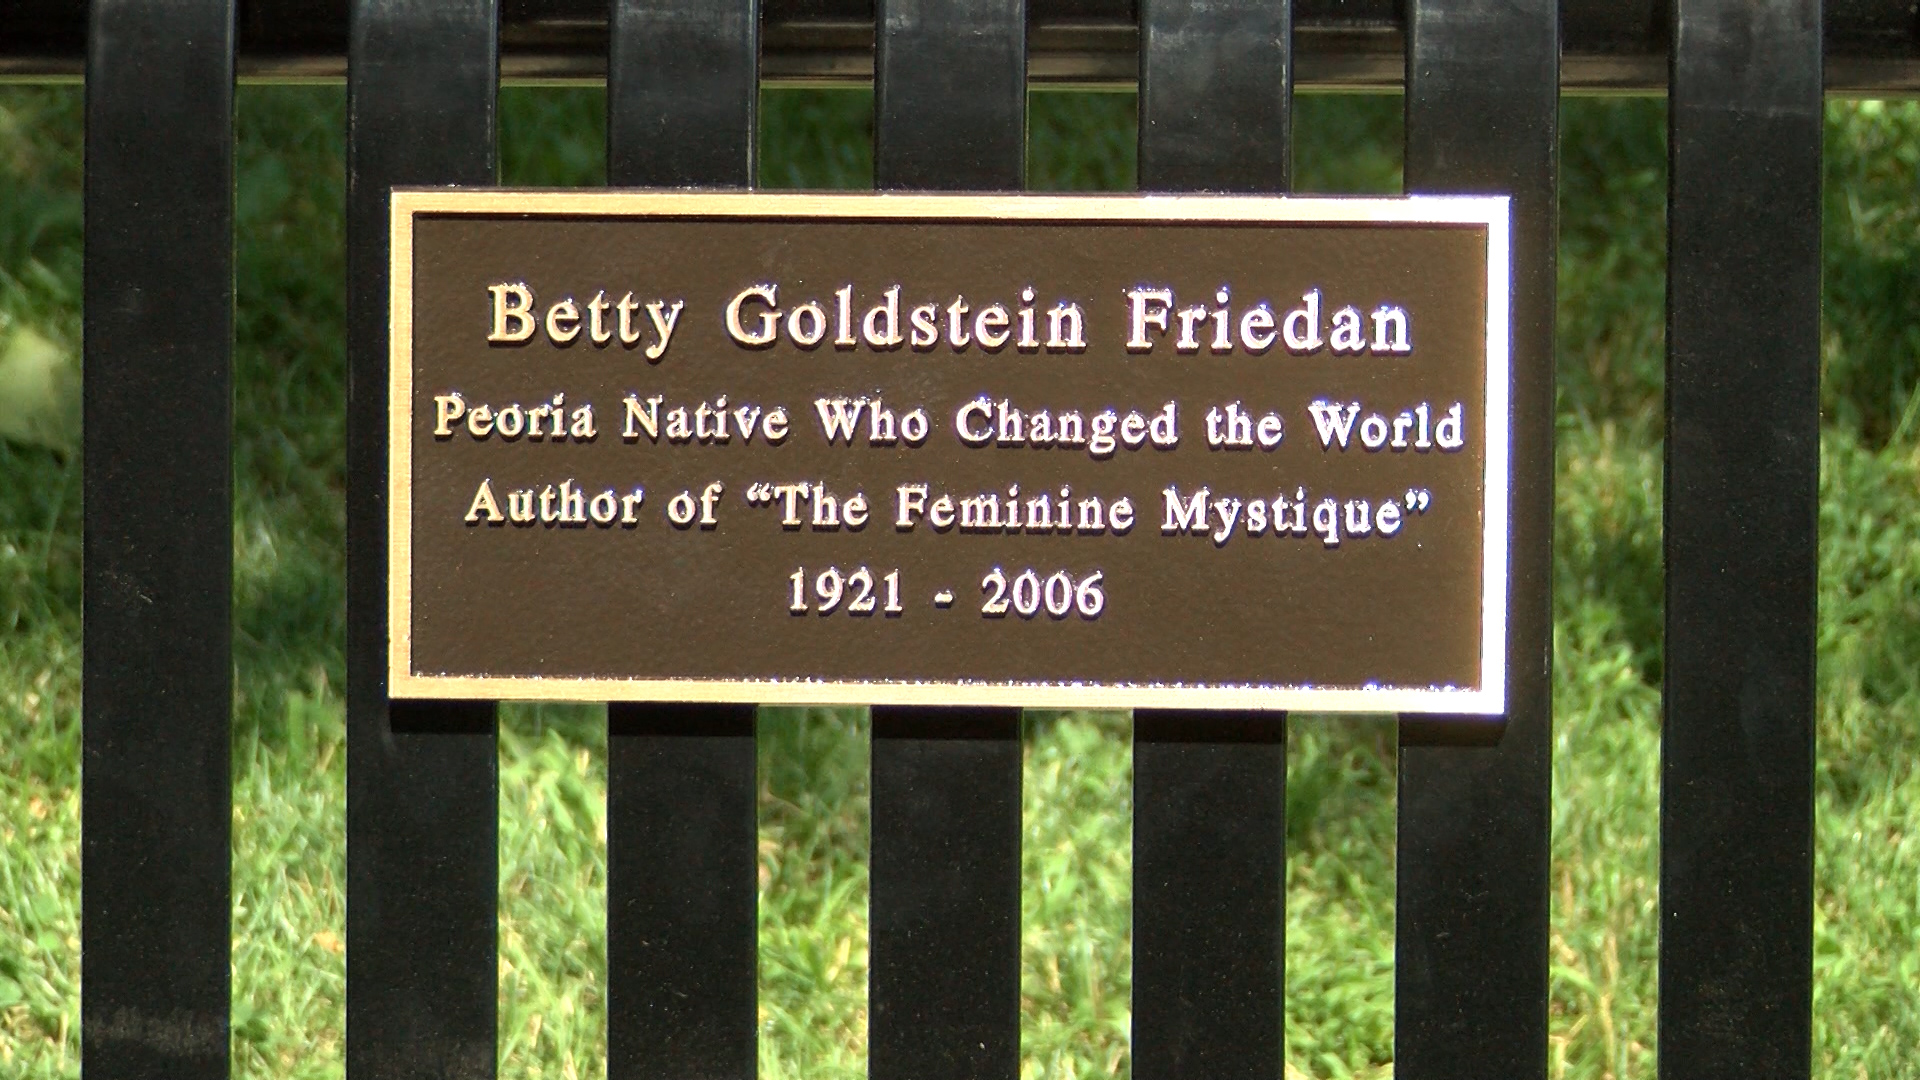 Bench at bradley park is dedicated to native betty friedan leader of the feminist movement ciproud